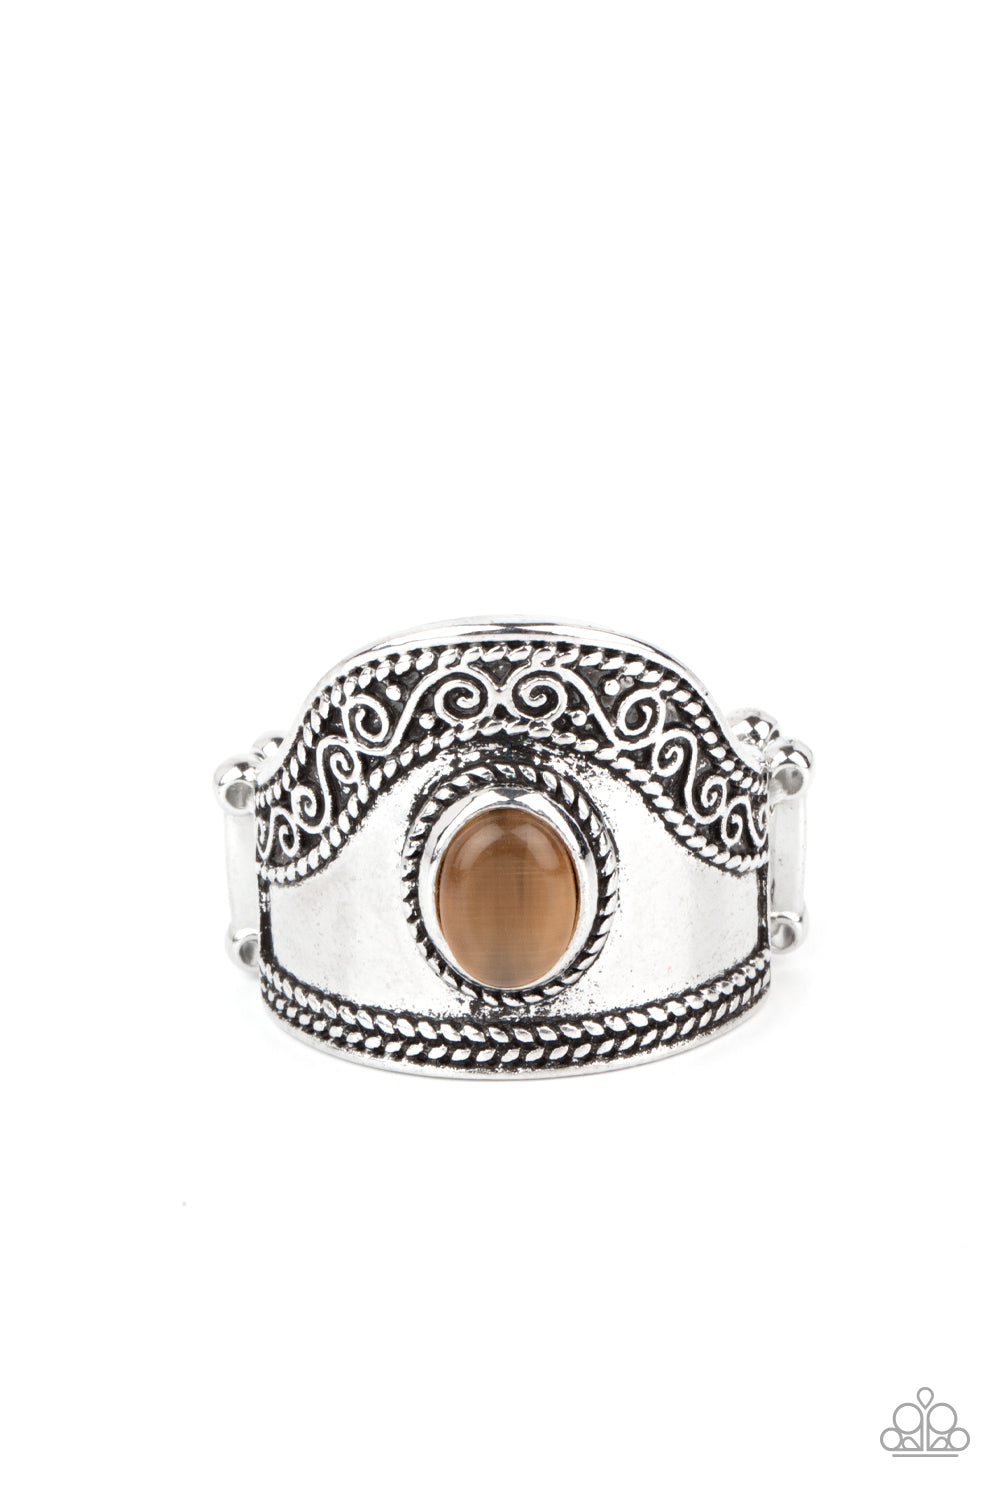 Dreamy Definition - Brown ring